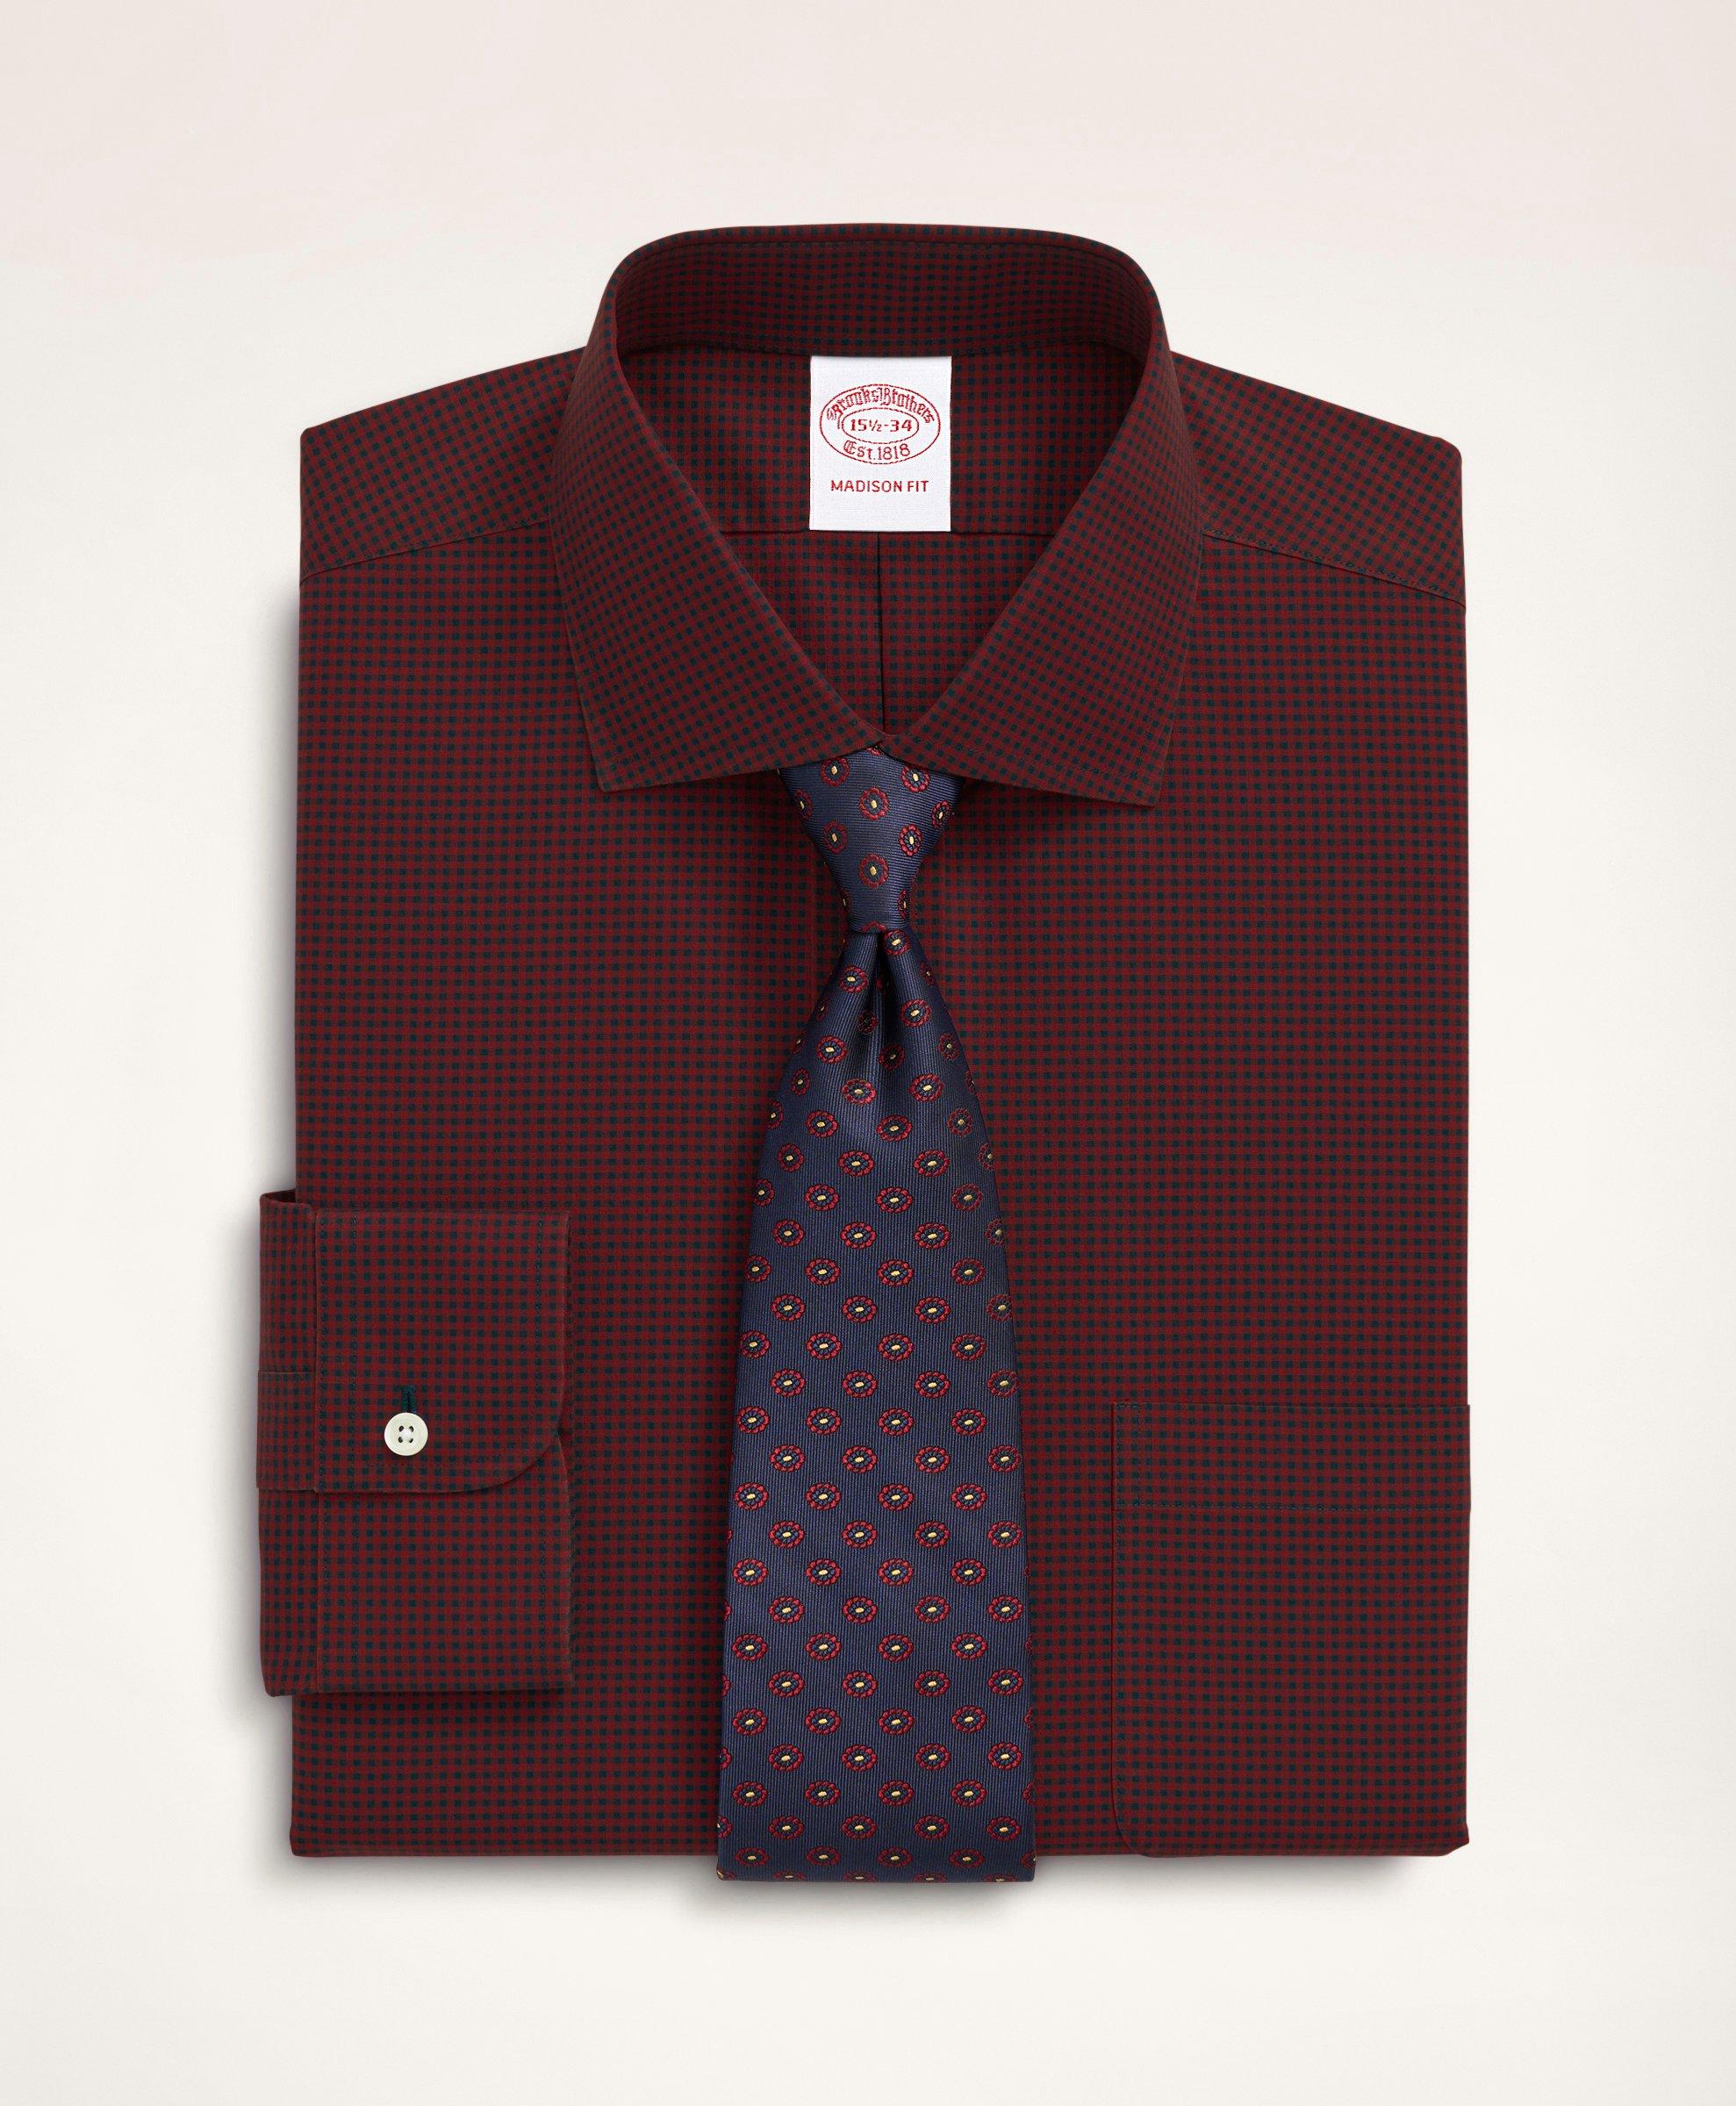 Brooks Brothers Stretch Madison Relaxed-fit Dress Shirt, Non-iron Poplin English Spread Collar Gingham | Dark Red |